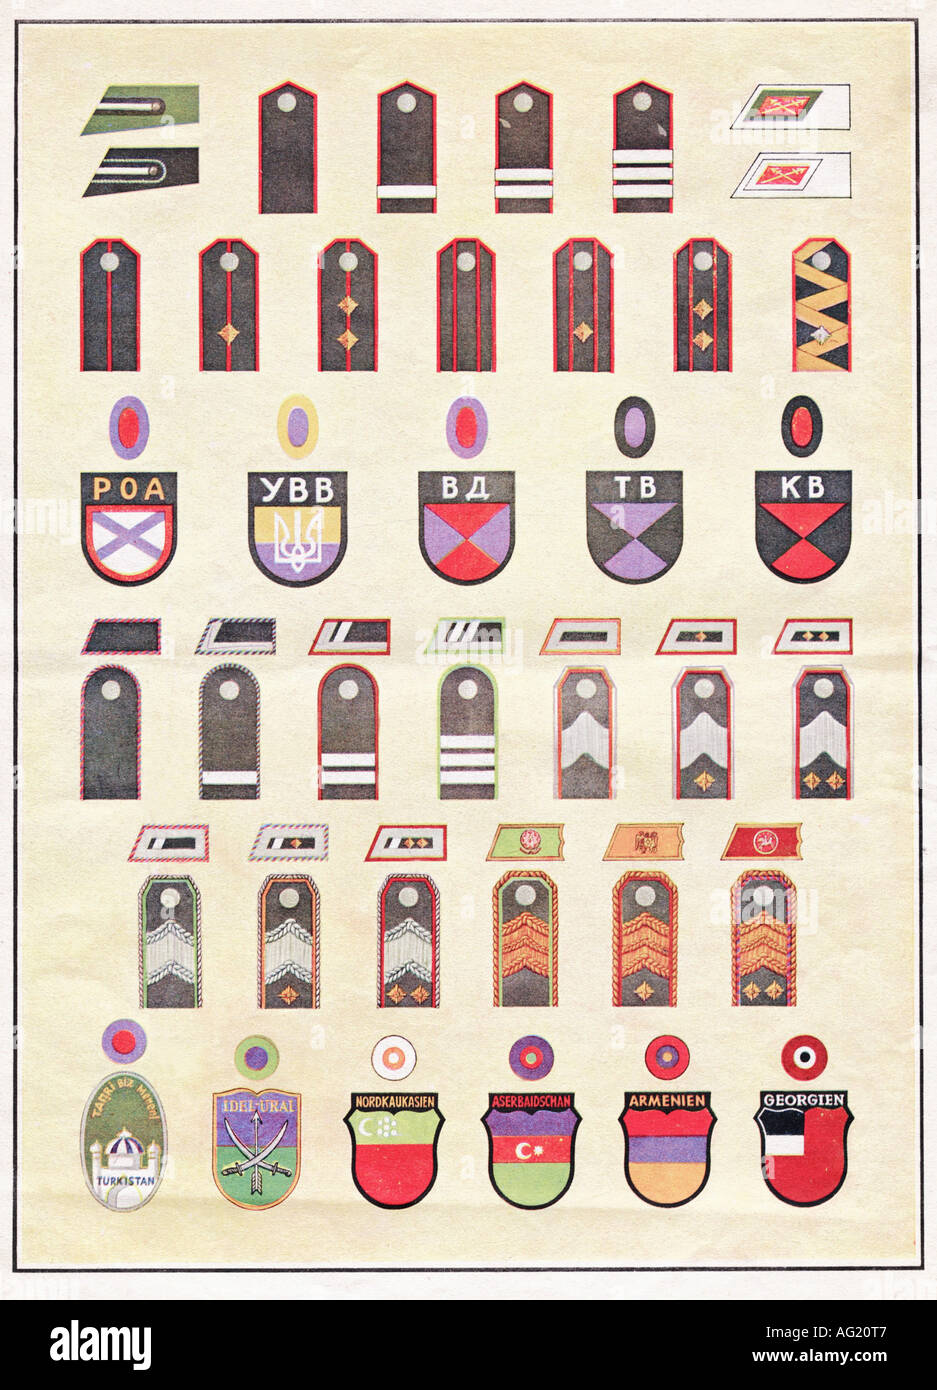 events, Second World War / WWII, foreigners in German service, badges of rank and insigna, Russian, Ukrainian, Cossack, Turkmenian, Caucasian, Armenian and Georgian, from "Signal", Number 24, 1943, special issue "East", French edition, Stock Photo